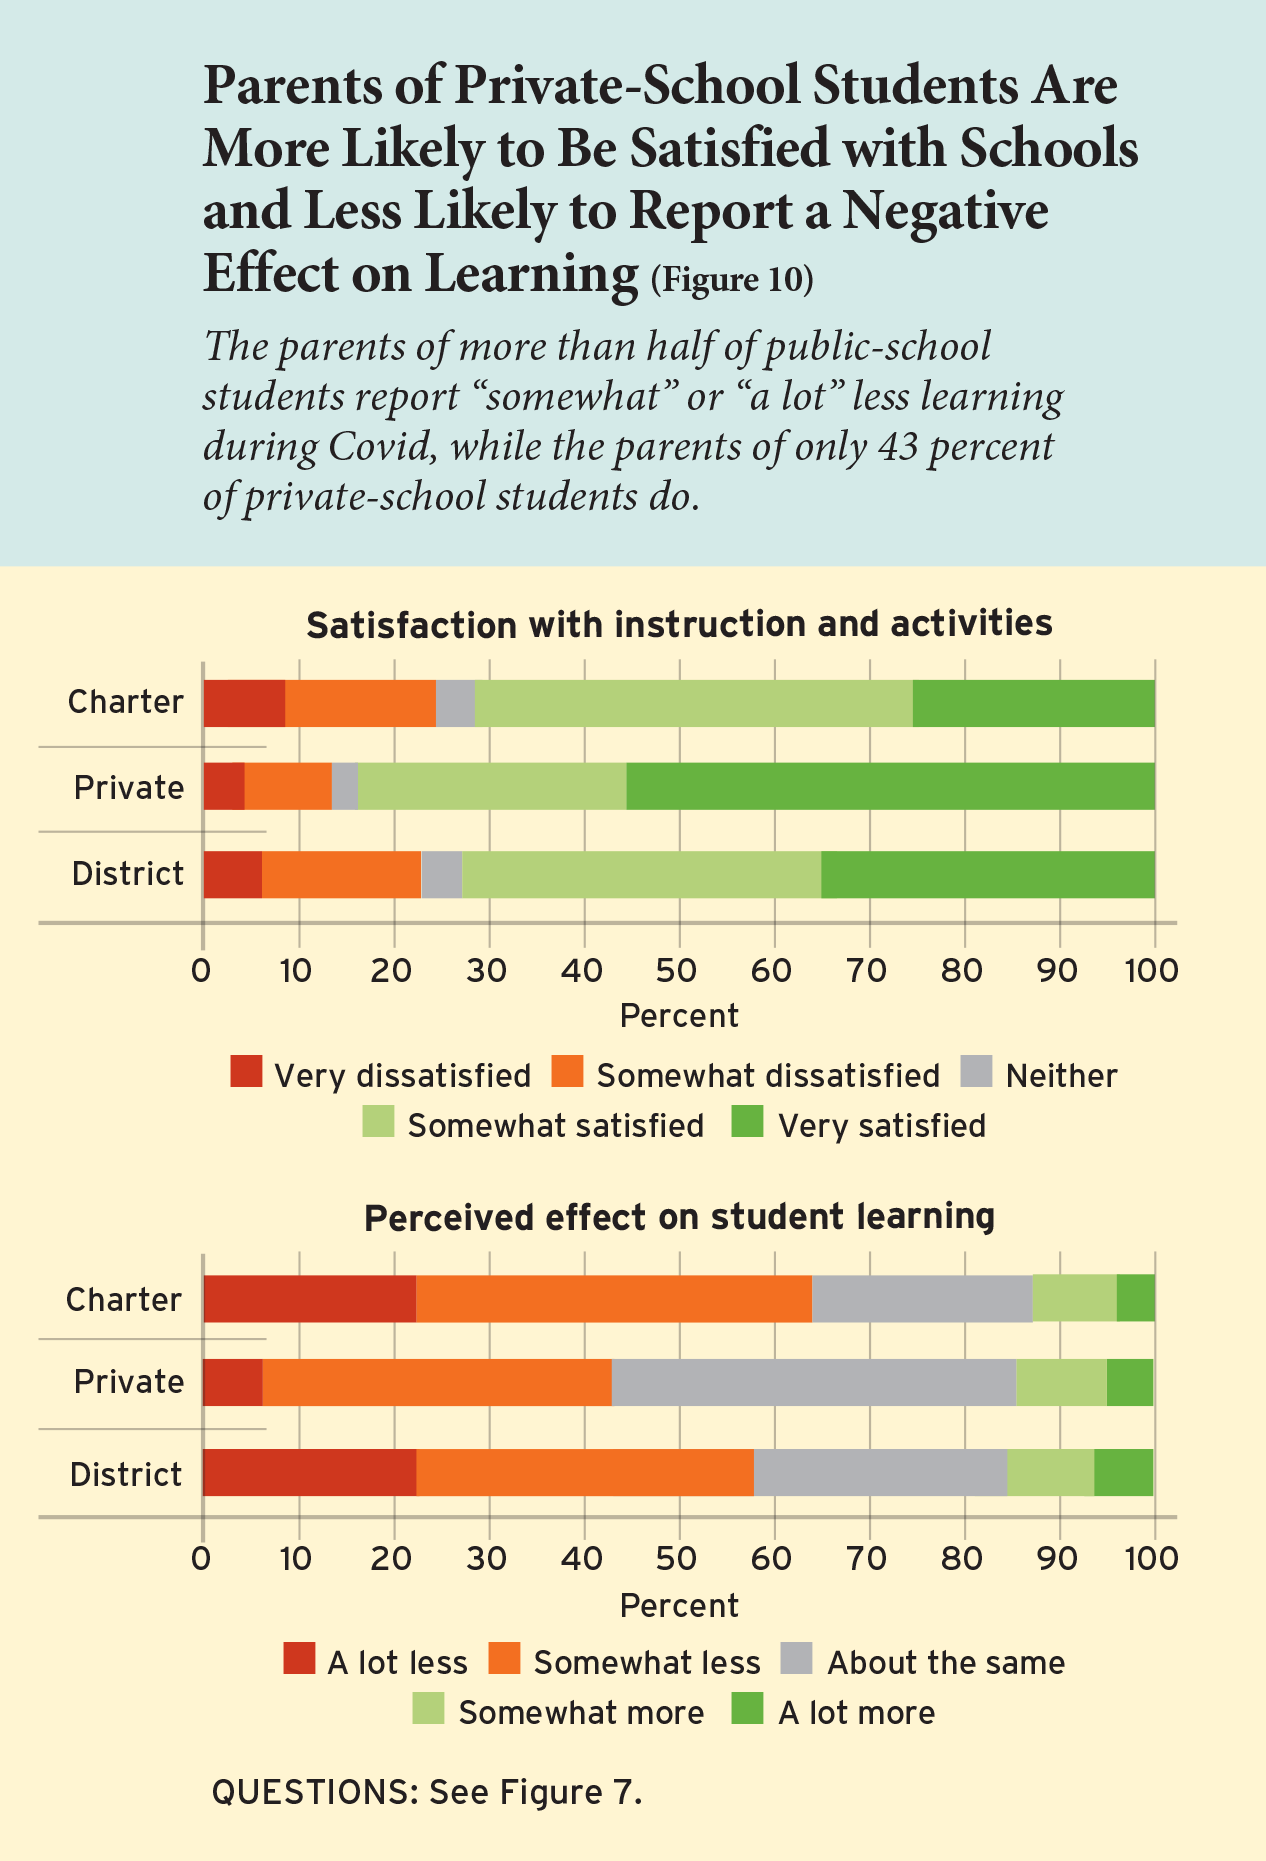 Parents of Private-School Students Are More Likely to Be Satisfied with Schools and Less Likely to Report a Negative Effect on Learning (Figure 10)